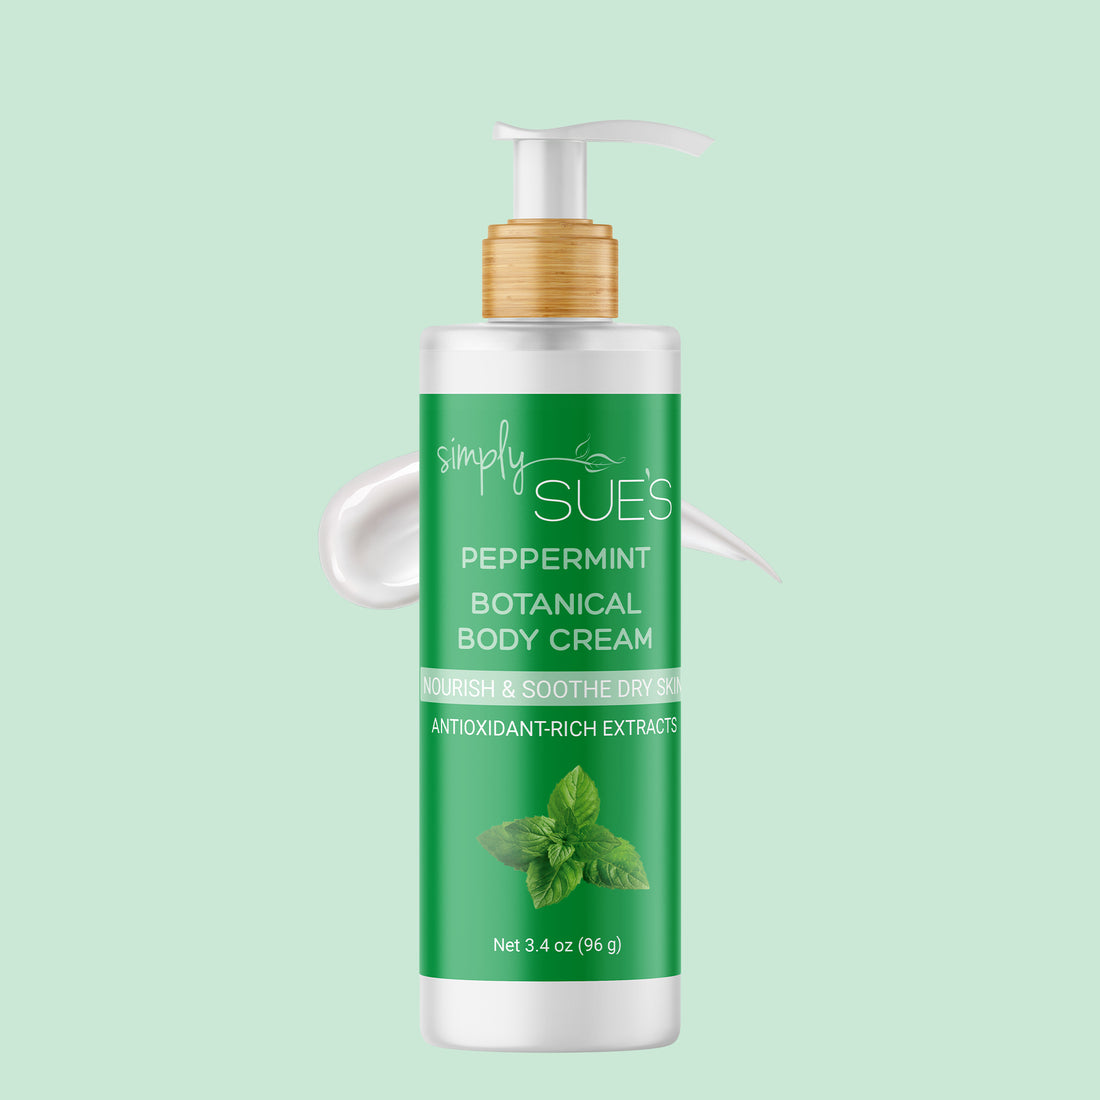 Simply Sue’s Peppermint Body Cream, waterless formulation for intensely dry skin